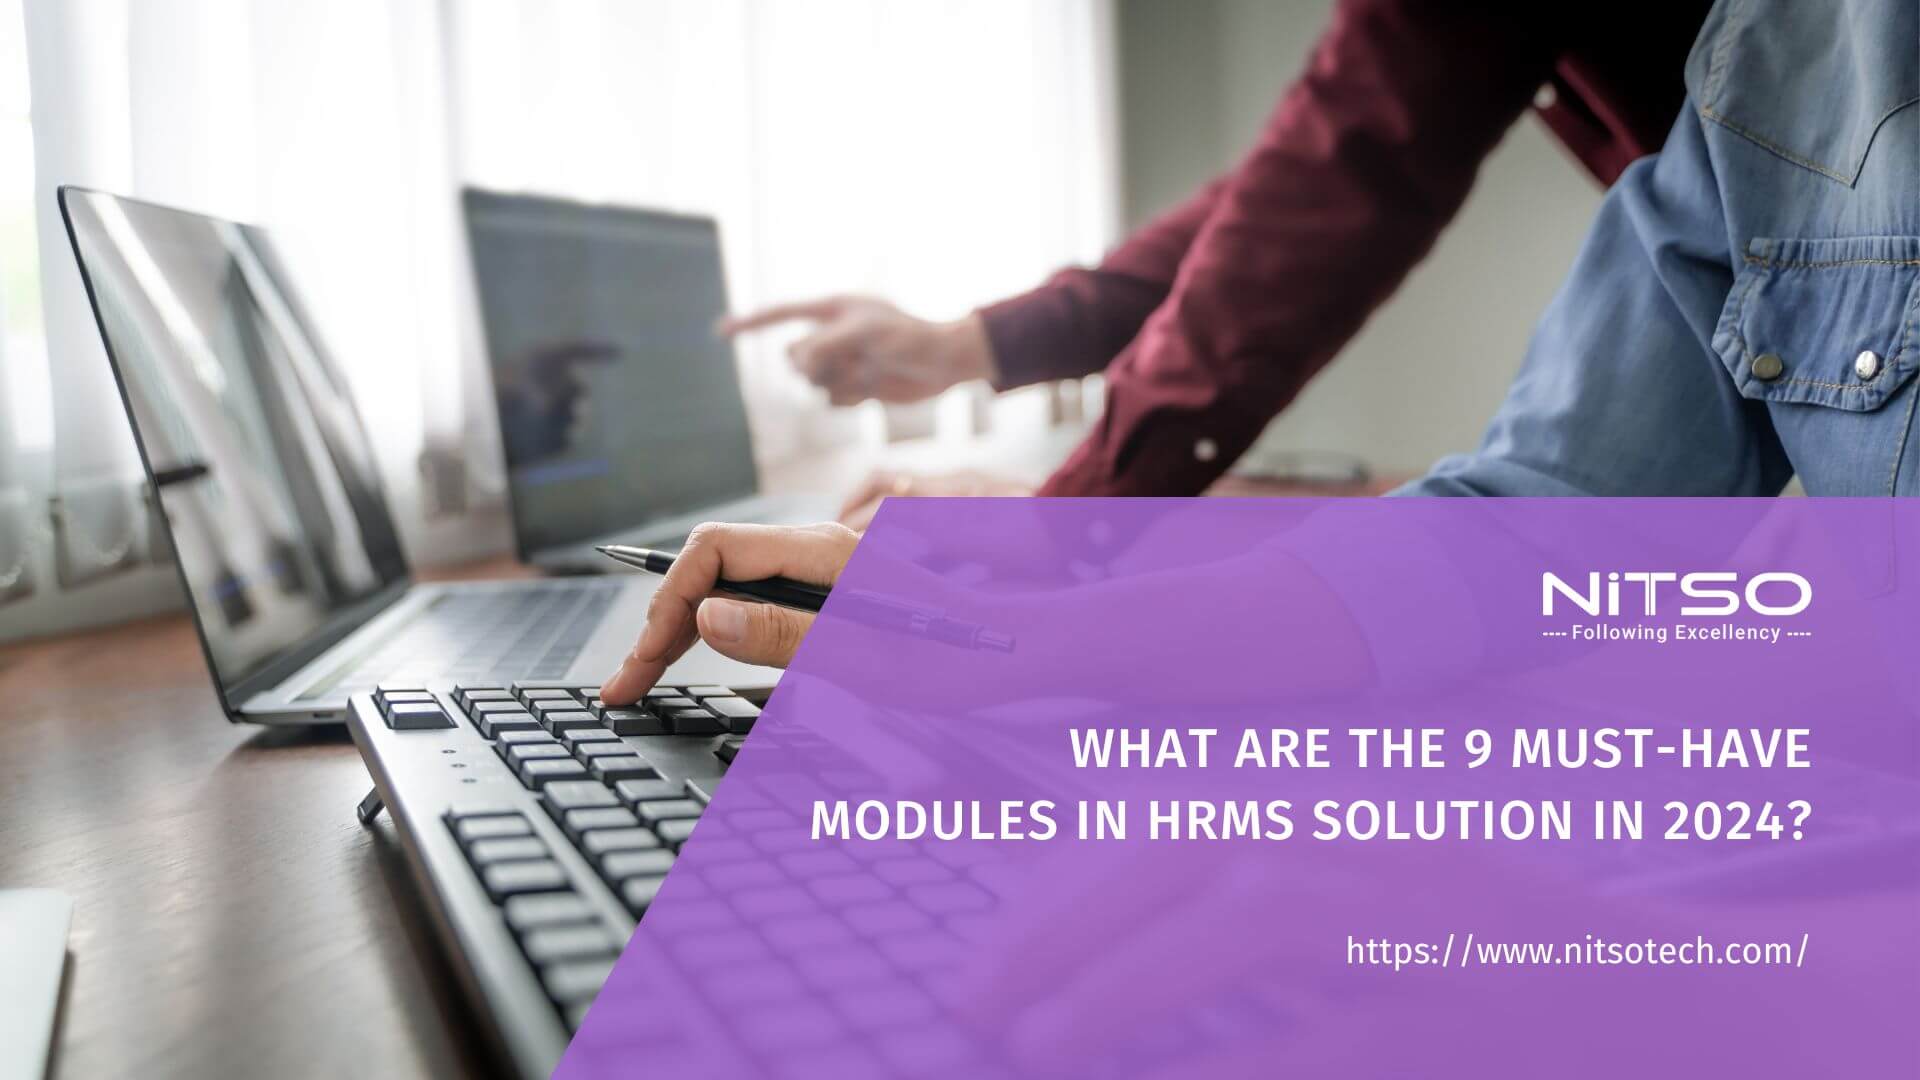 What Are the 9 Must-Have Modules in HRMS Solution in 2024?